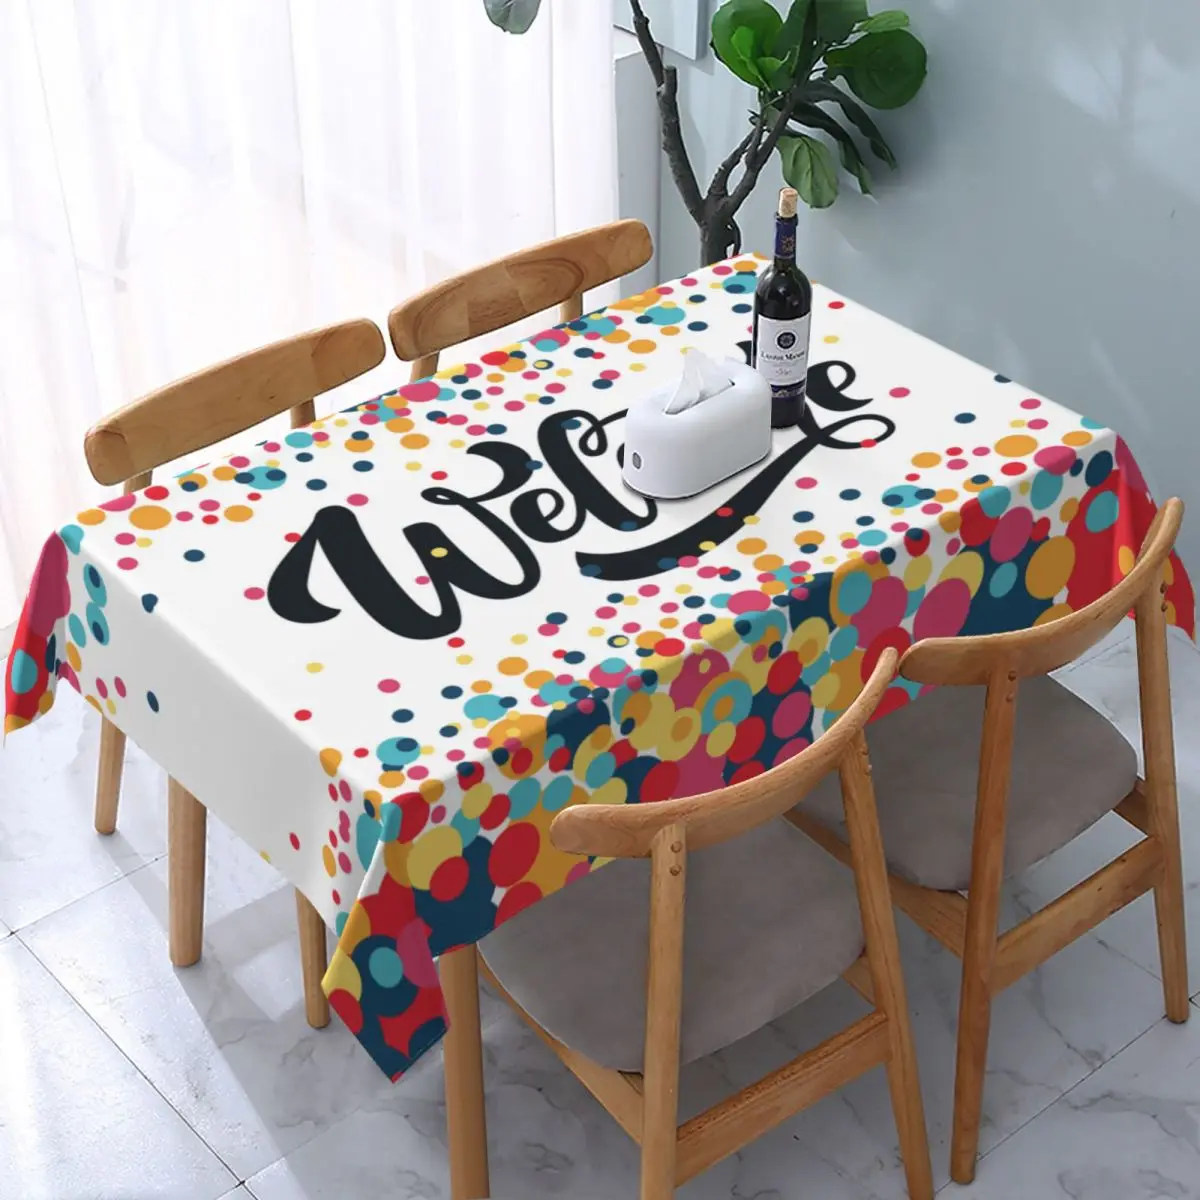 

Welcome Tablecloth Rectangular Elastic Fitted Oilproof Table Cover Cloth for Banquet